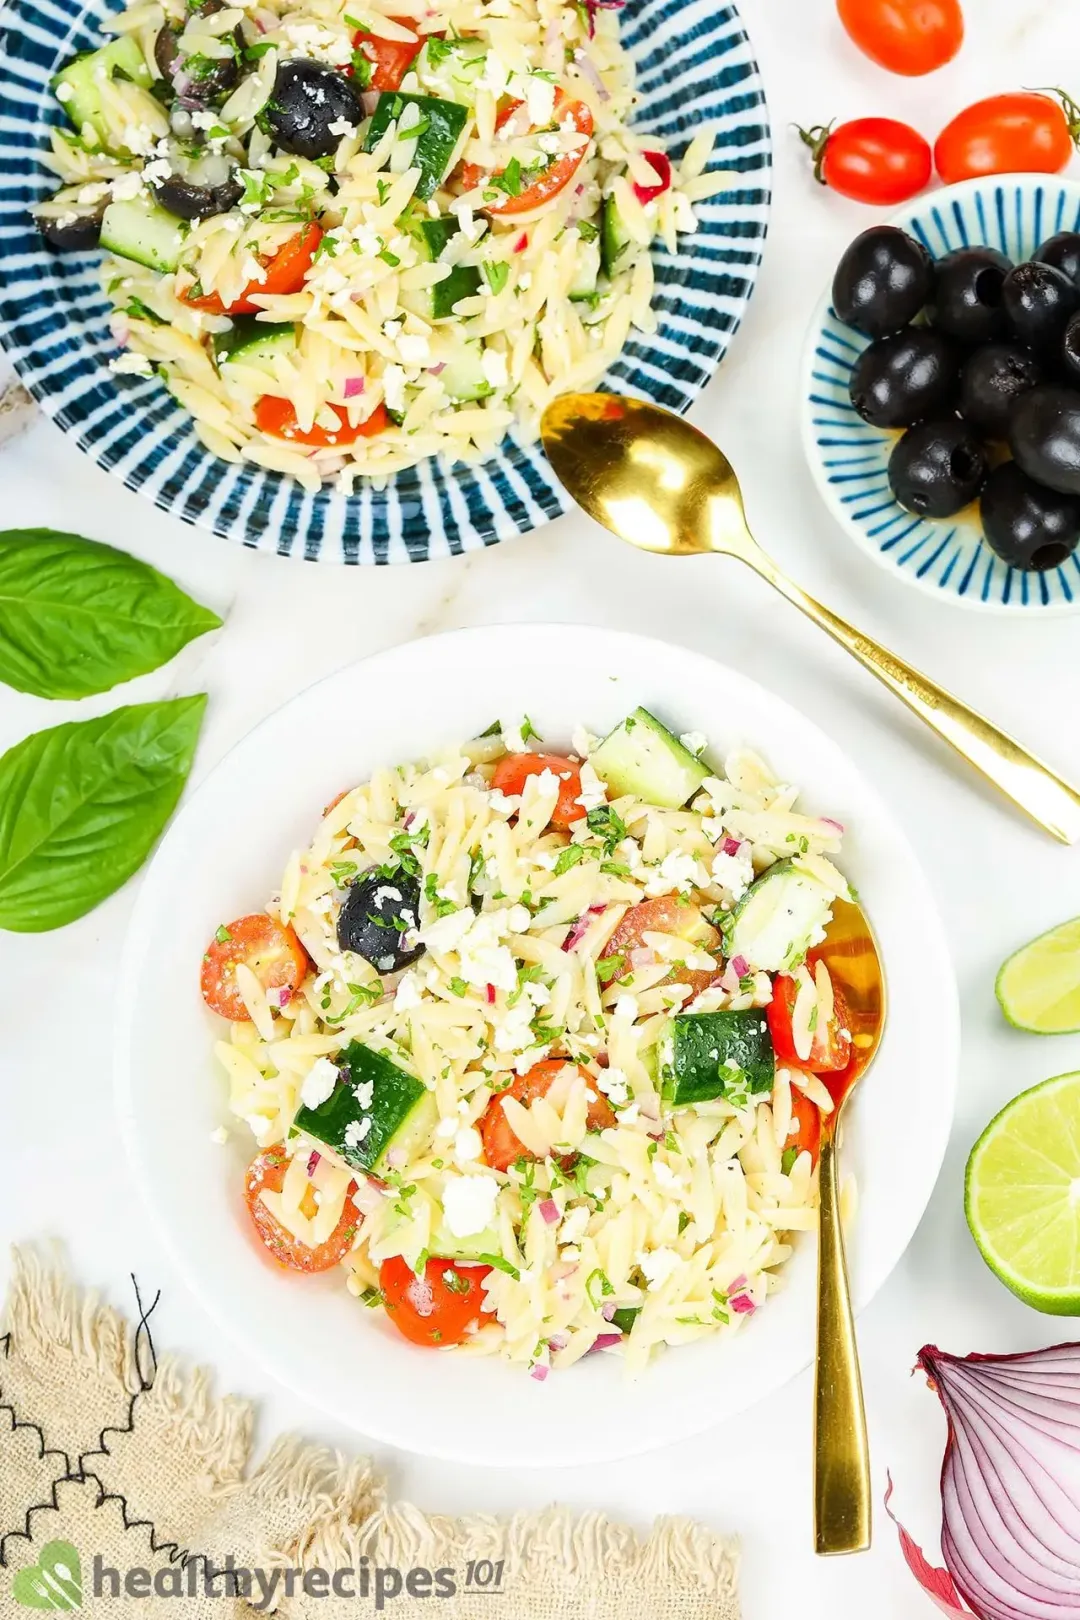 Tips for the Perfect Orzo Salad